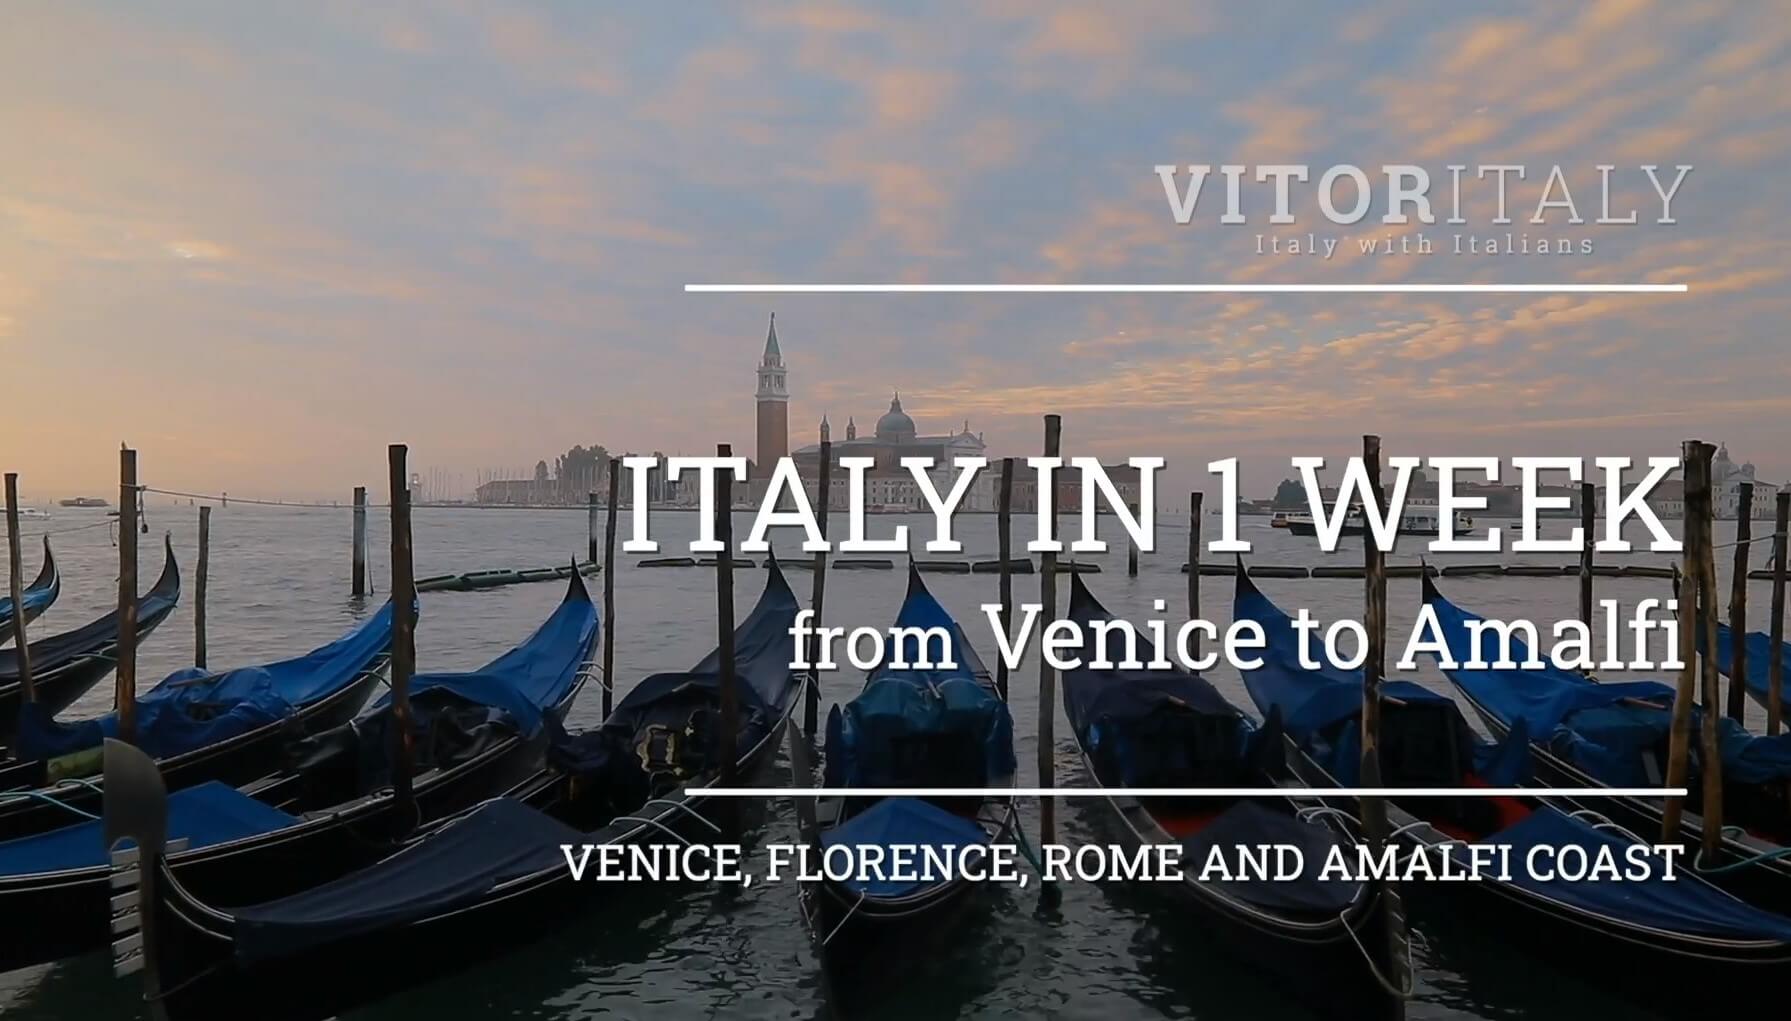 ITALY IN 1 WEEK - Venice, Florence, Rome and Amalfi Coast